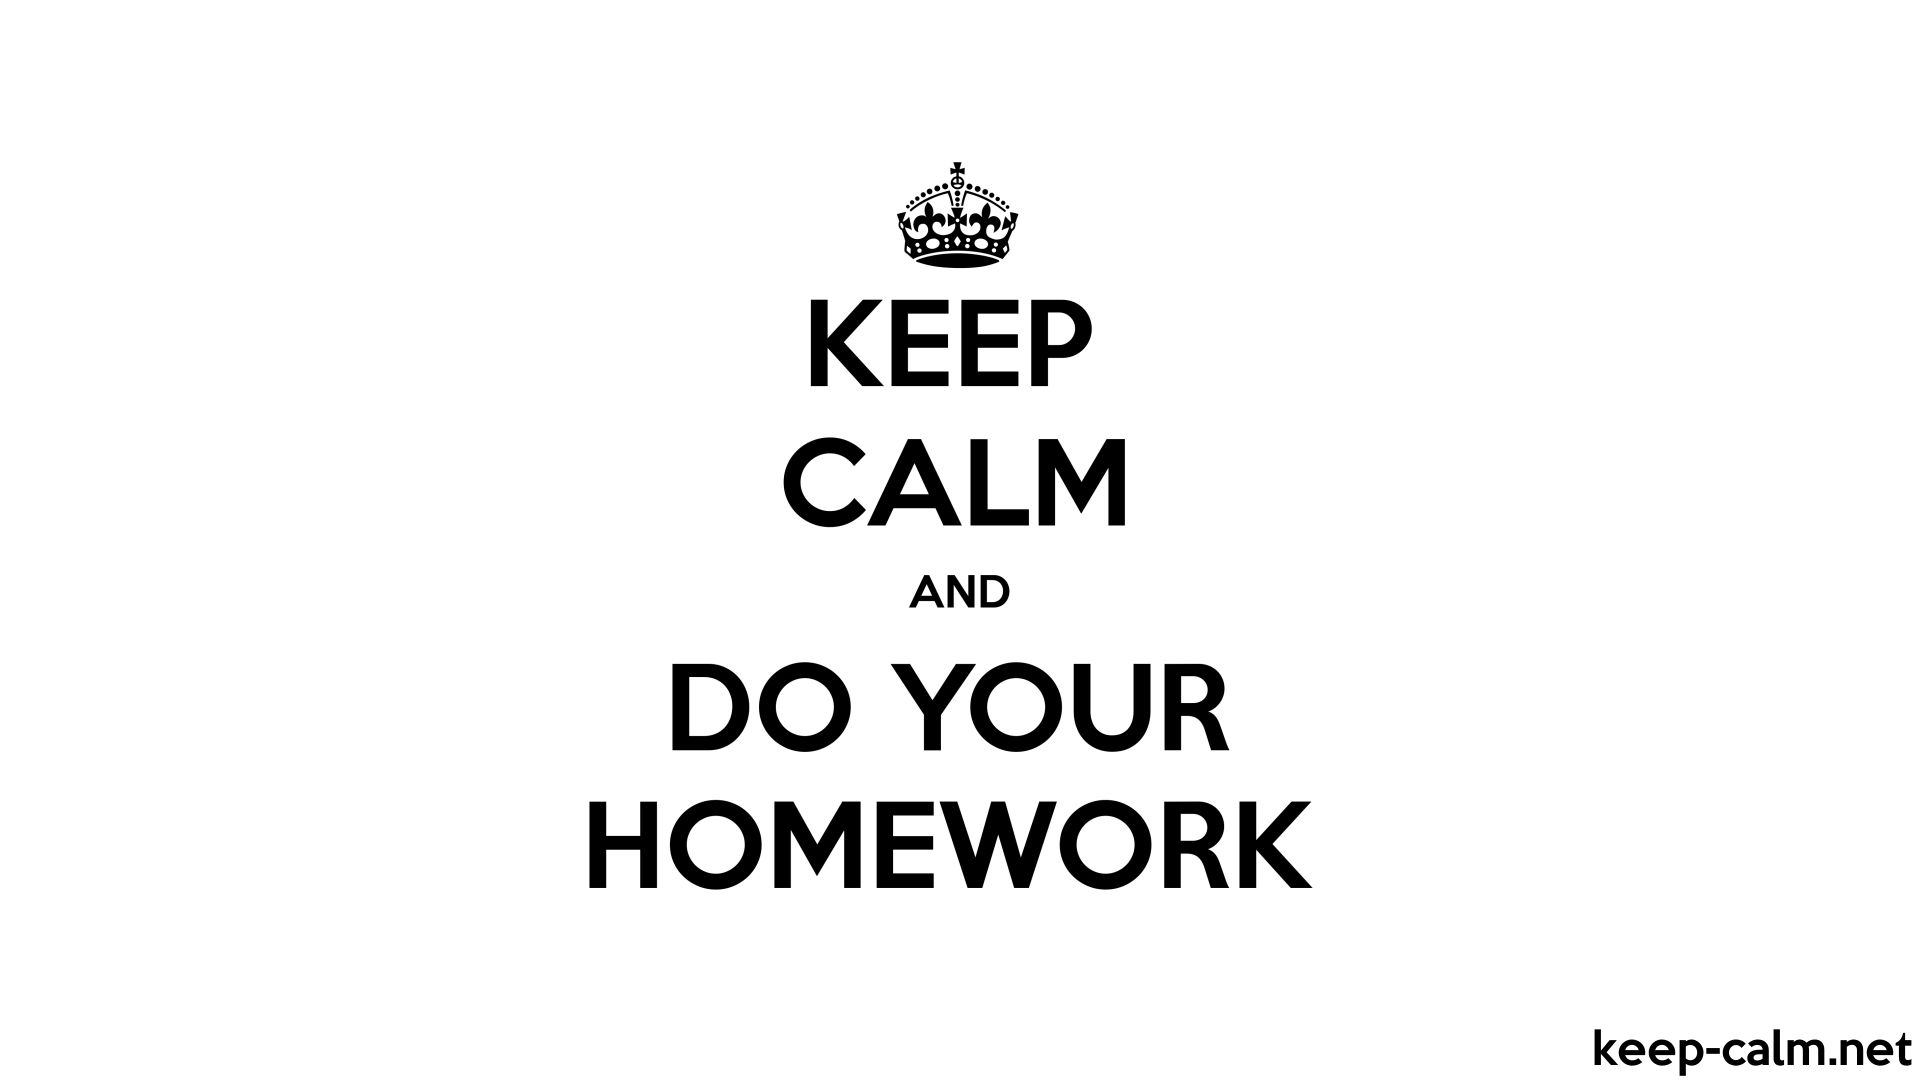 this is my homework